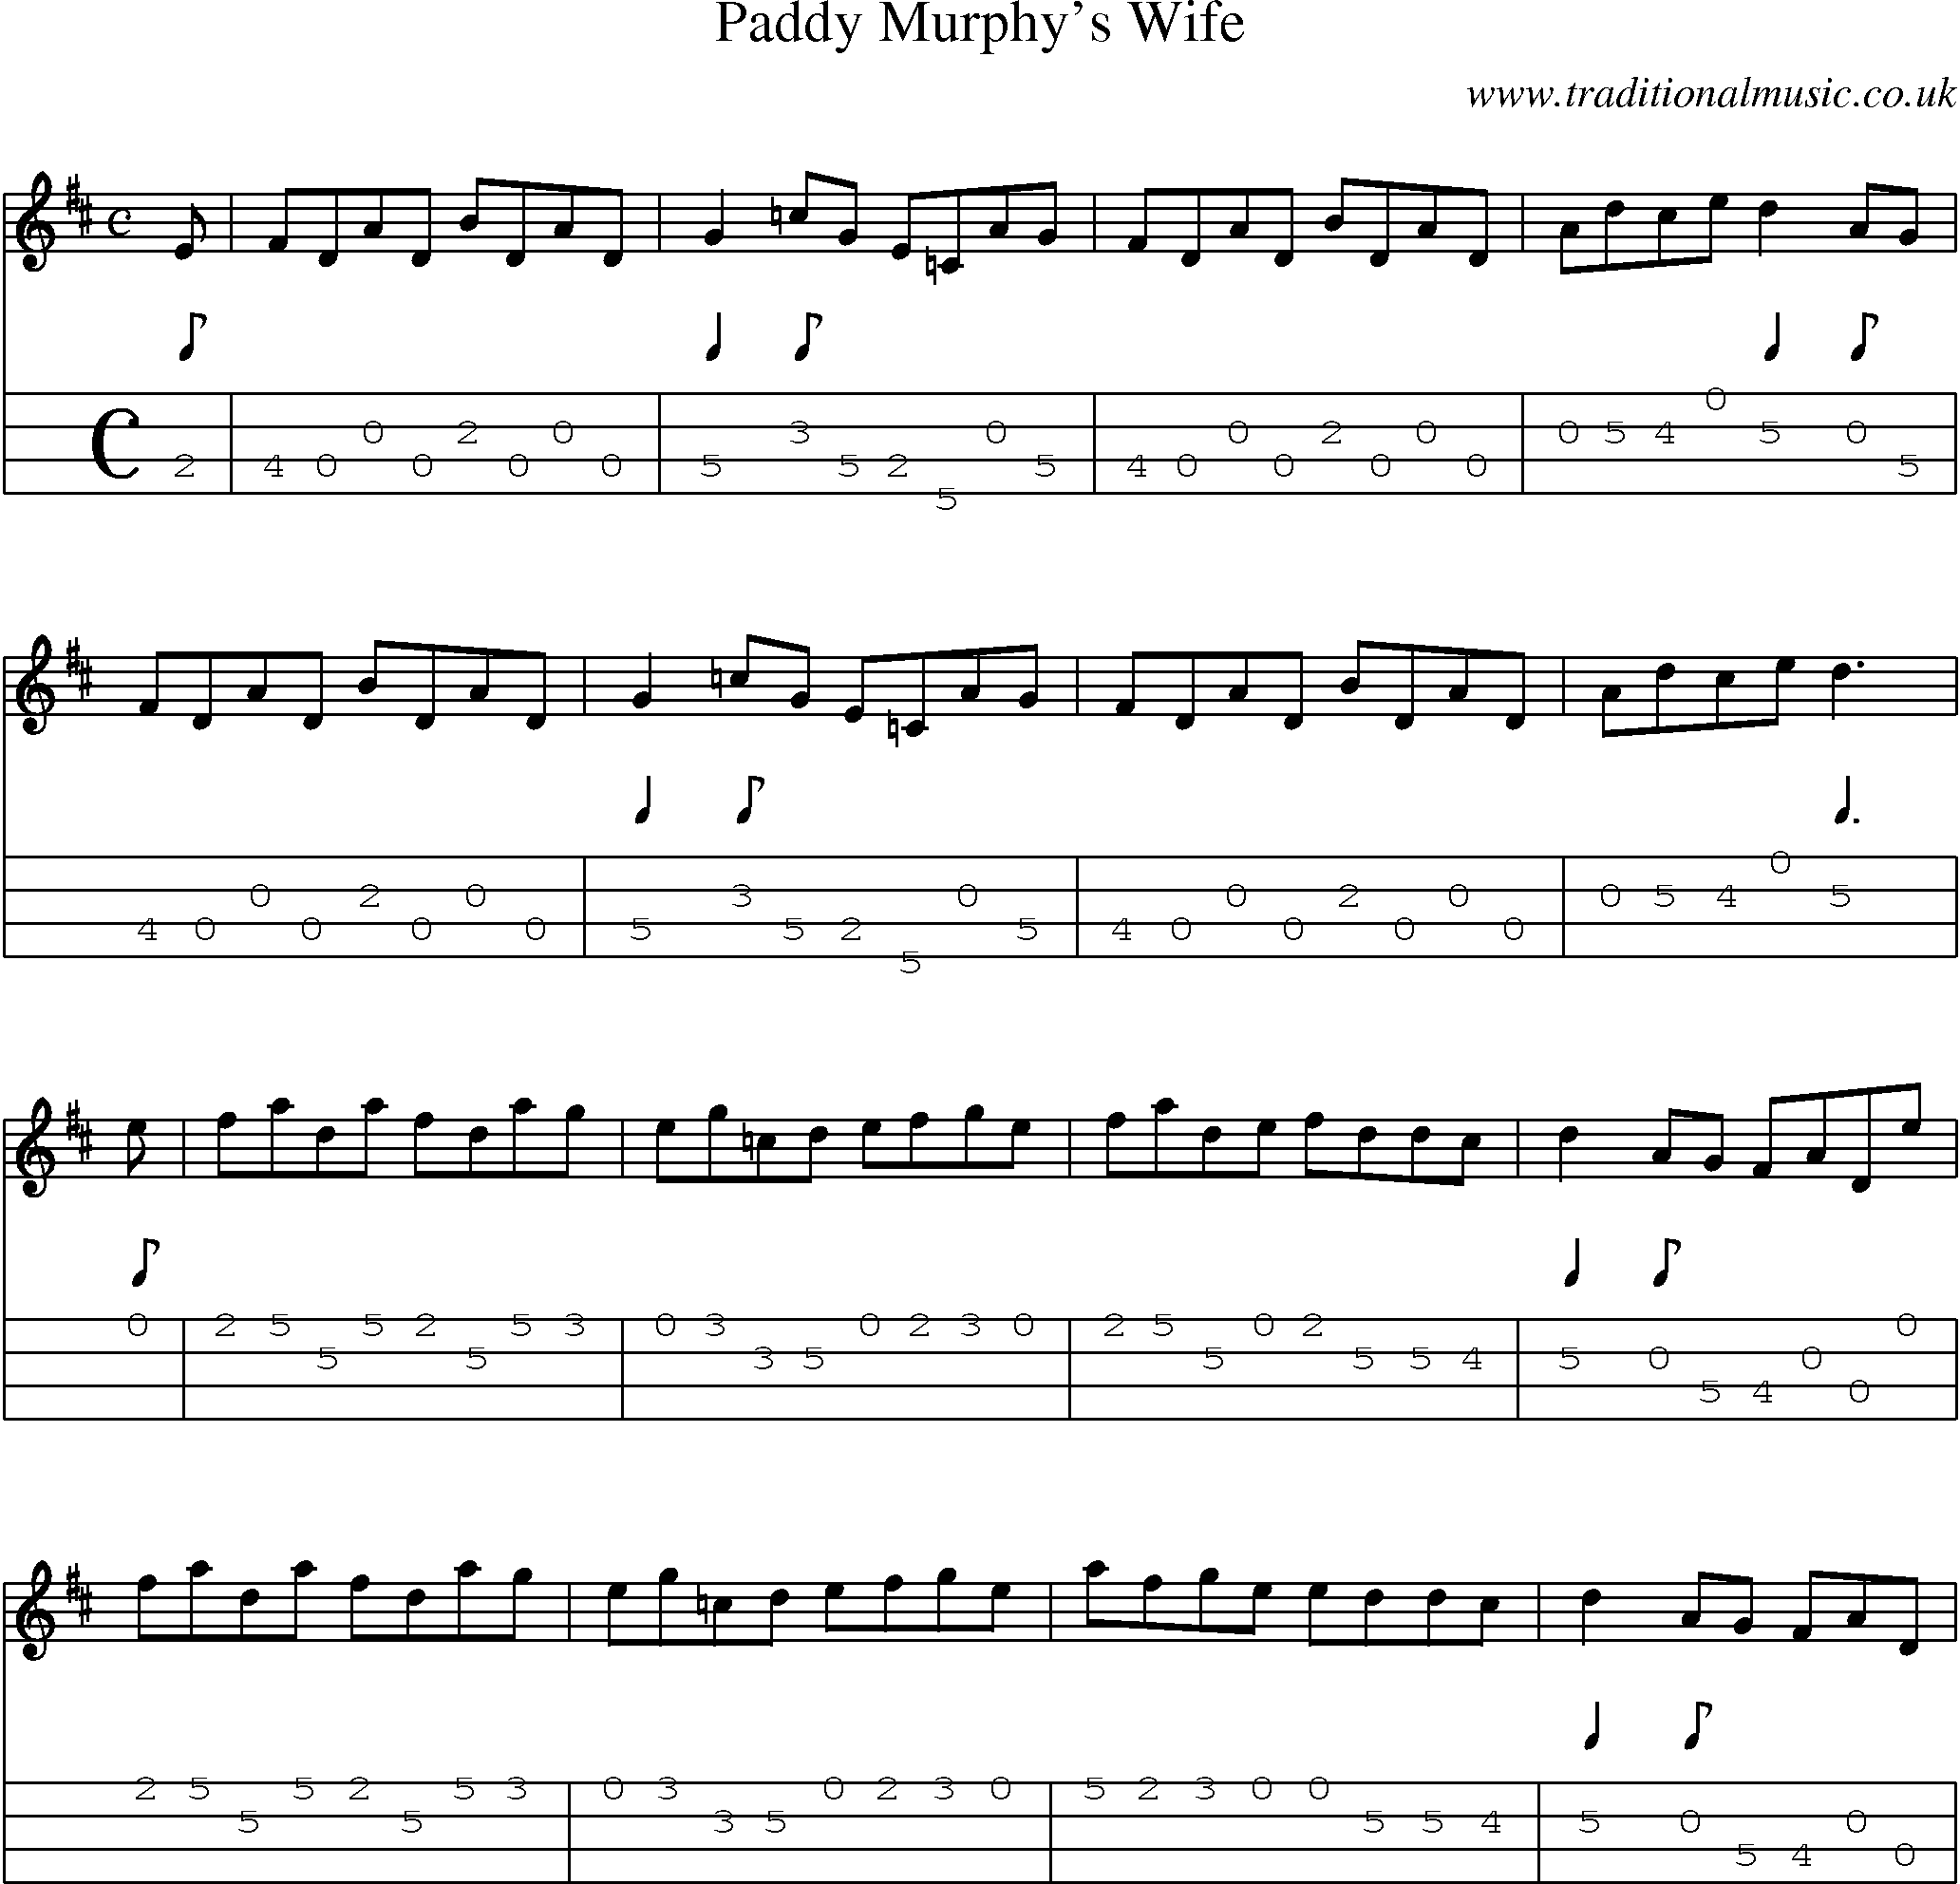 Music Score and Mandolin Tabs for Paddy Murphys Wife